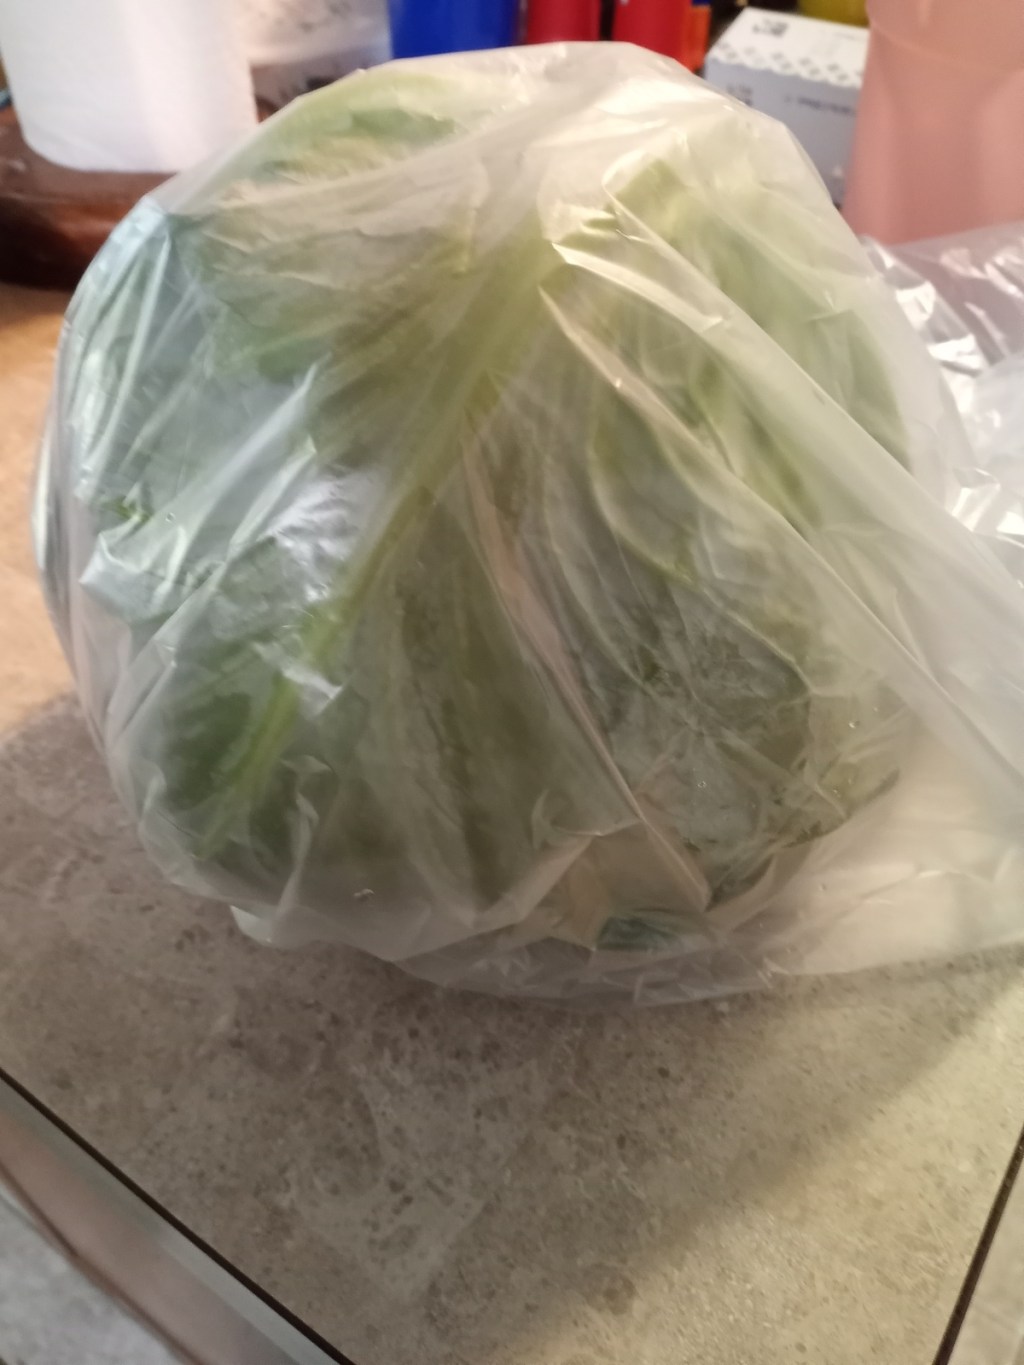 A head of cabbage sitting on a countertop